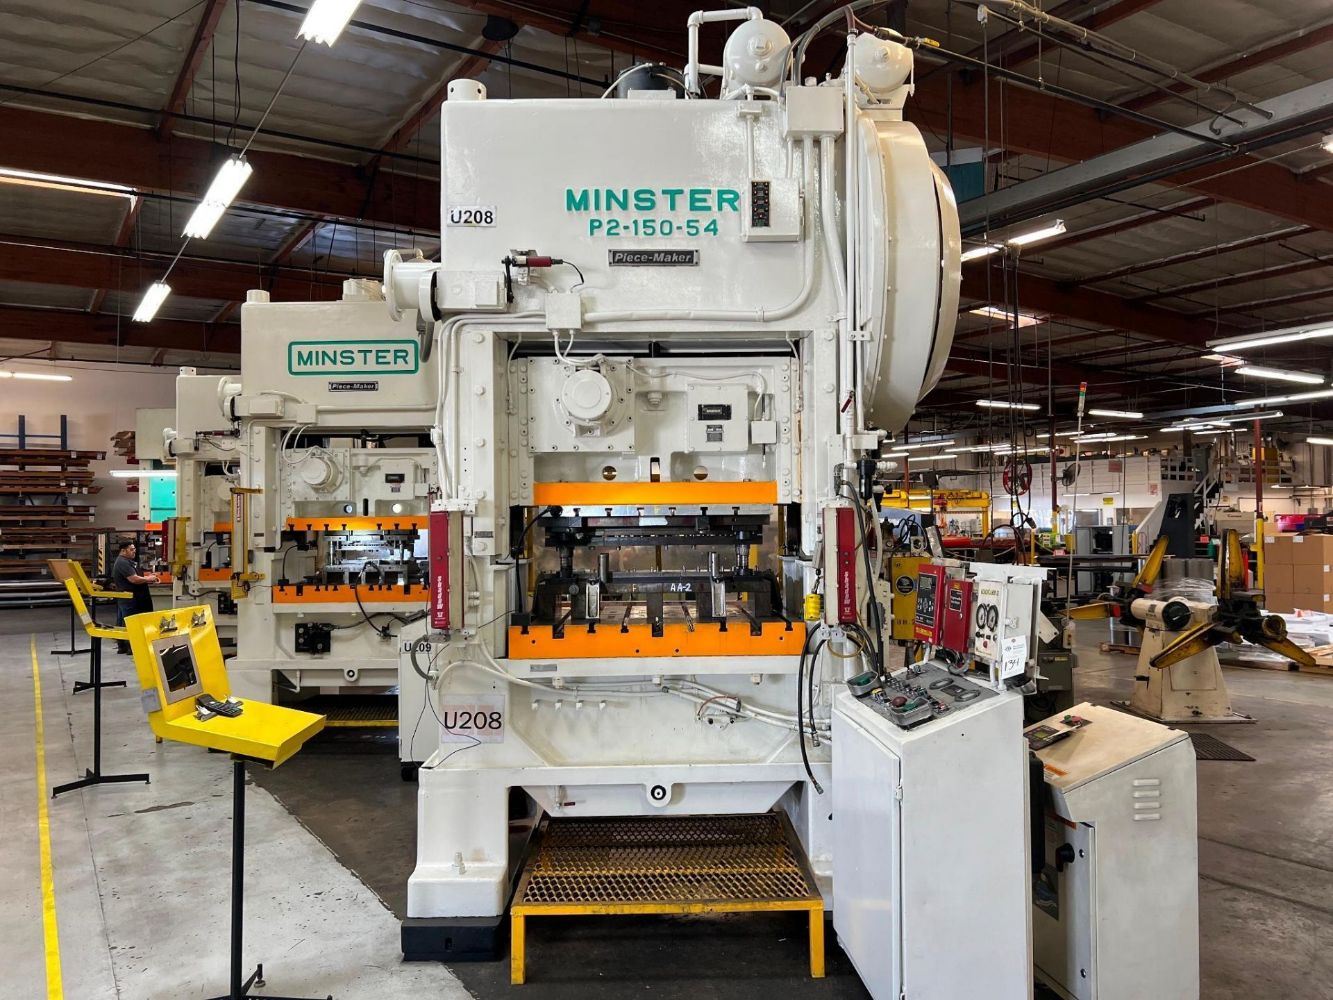 Immaculate Minster Stamping Press Facility Surplus in California